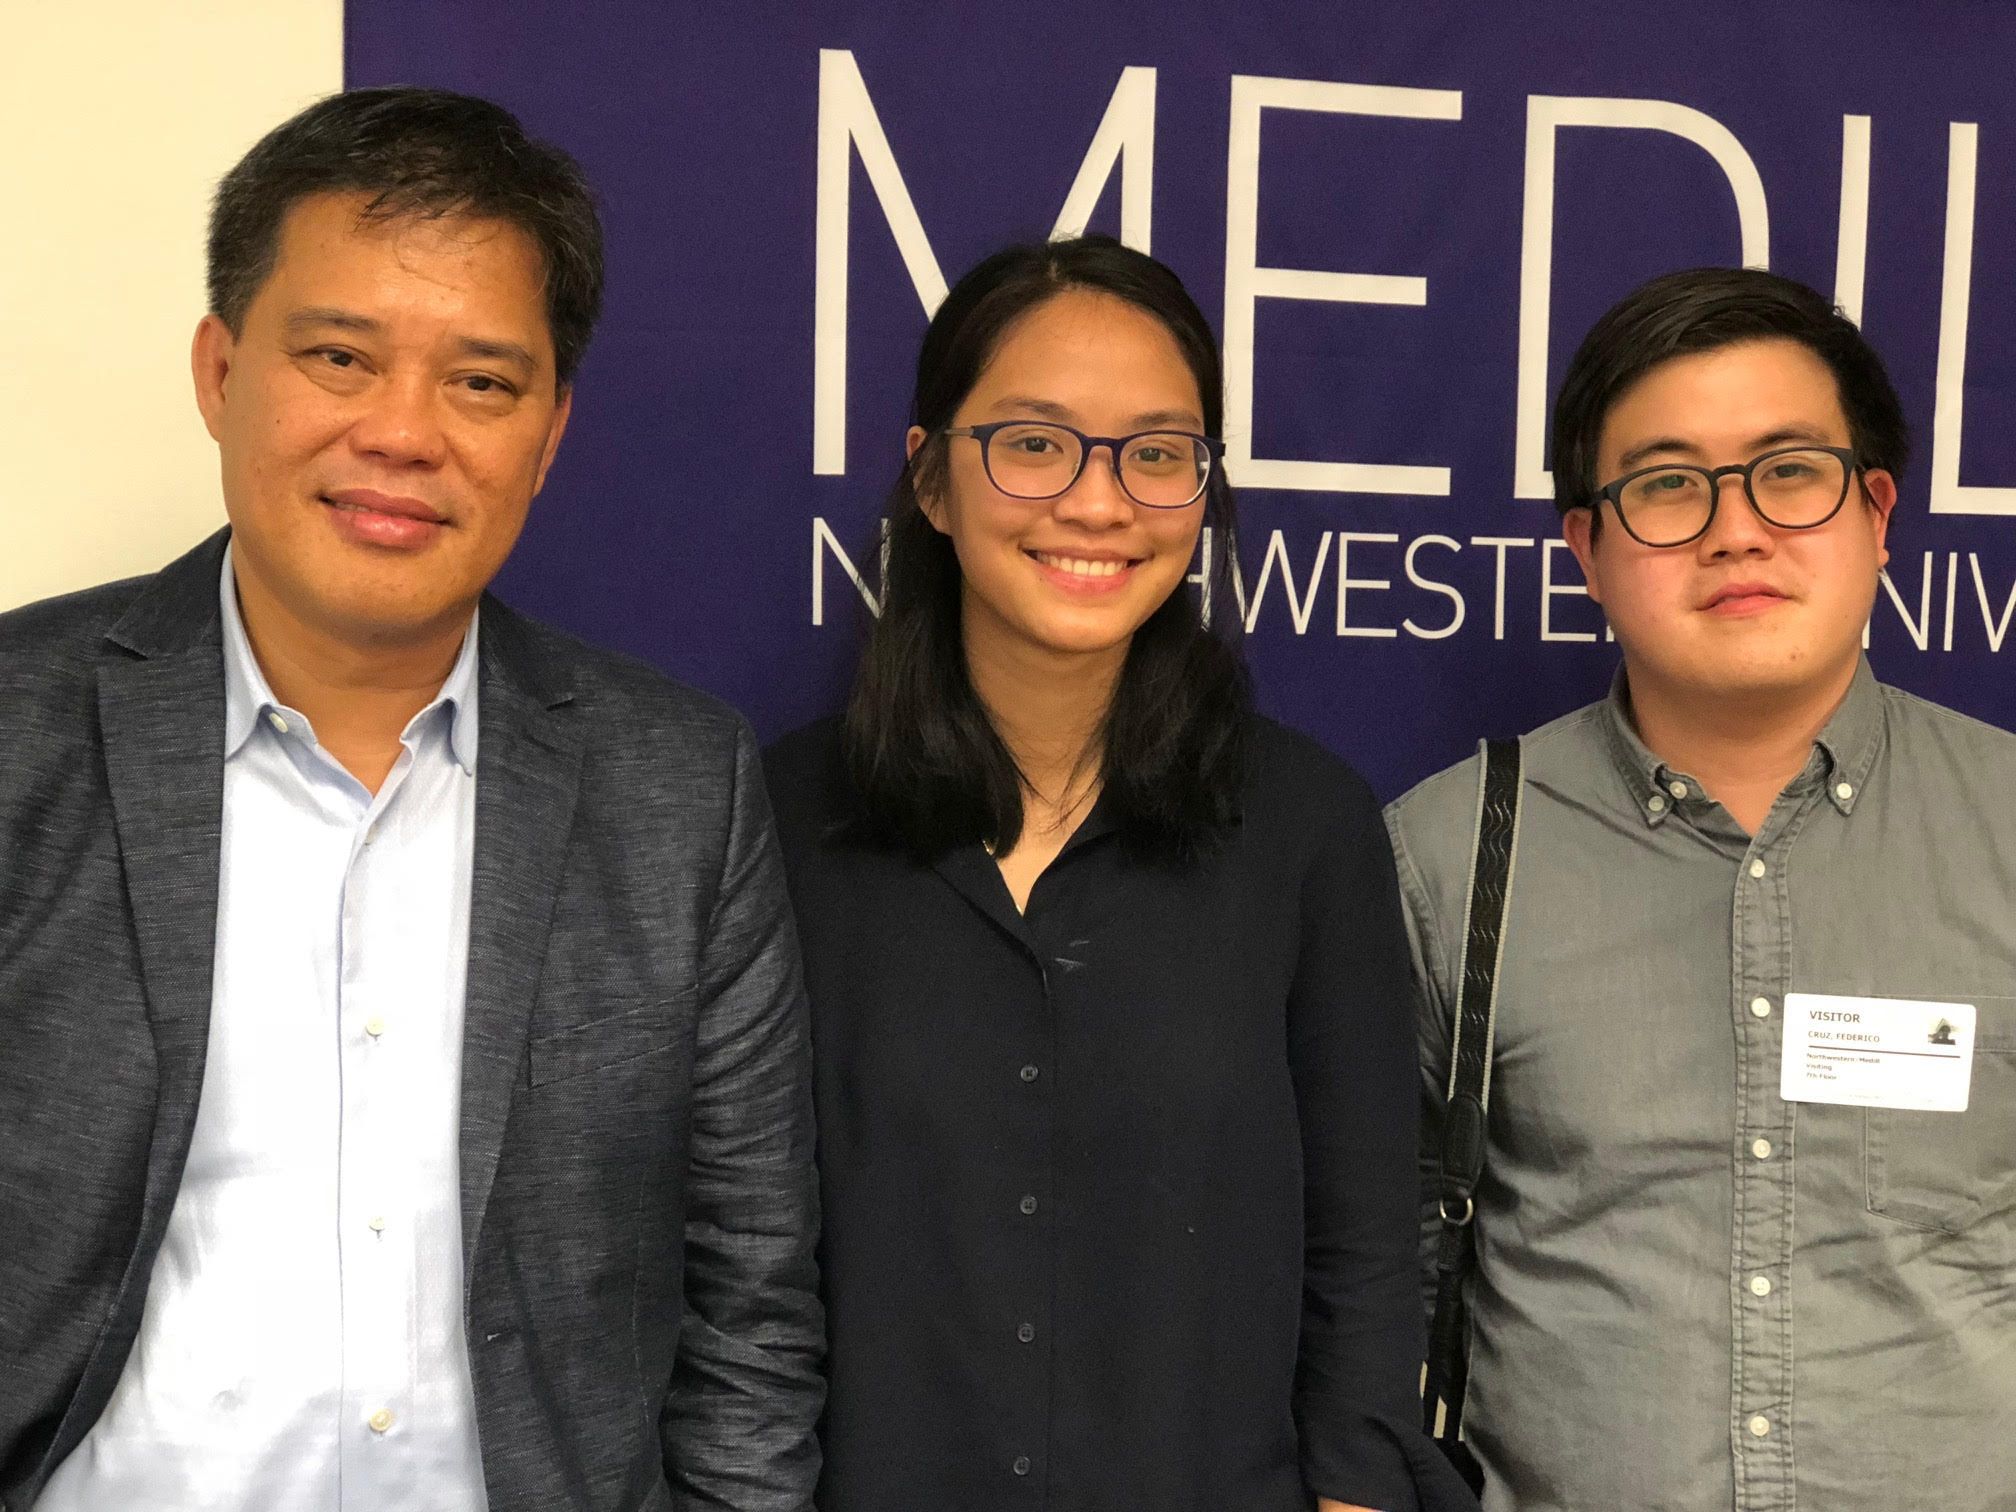 Human Rights Watch Philippines Researcher Carlos Conde, Medill student fellow Pat Nabong, and photojournalist Frederico Cruz. Image by Kem Knapp Sawyer. United States, 2018.